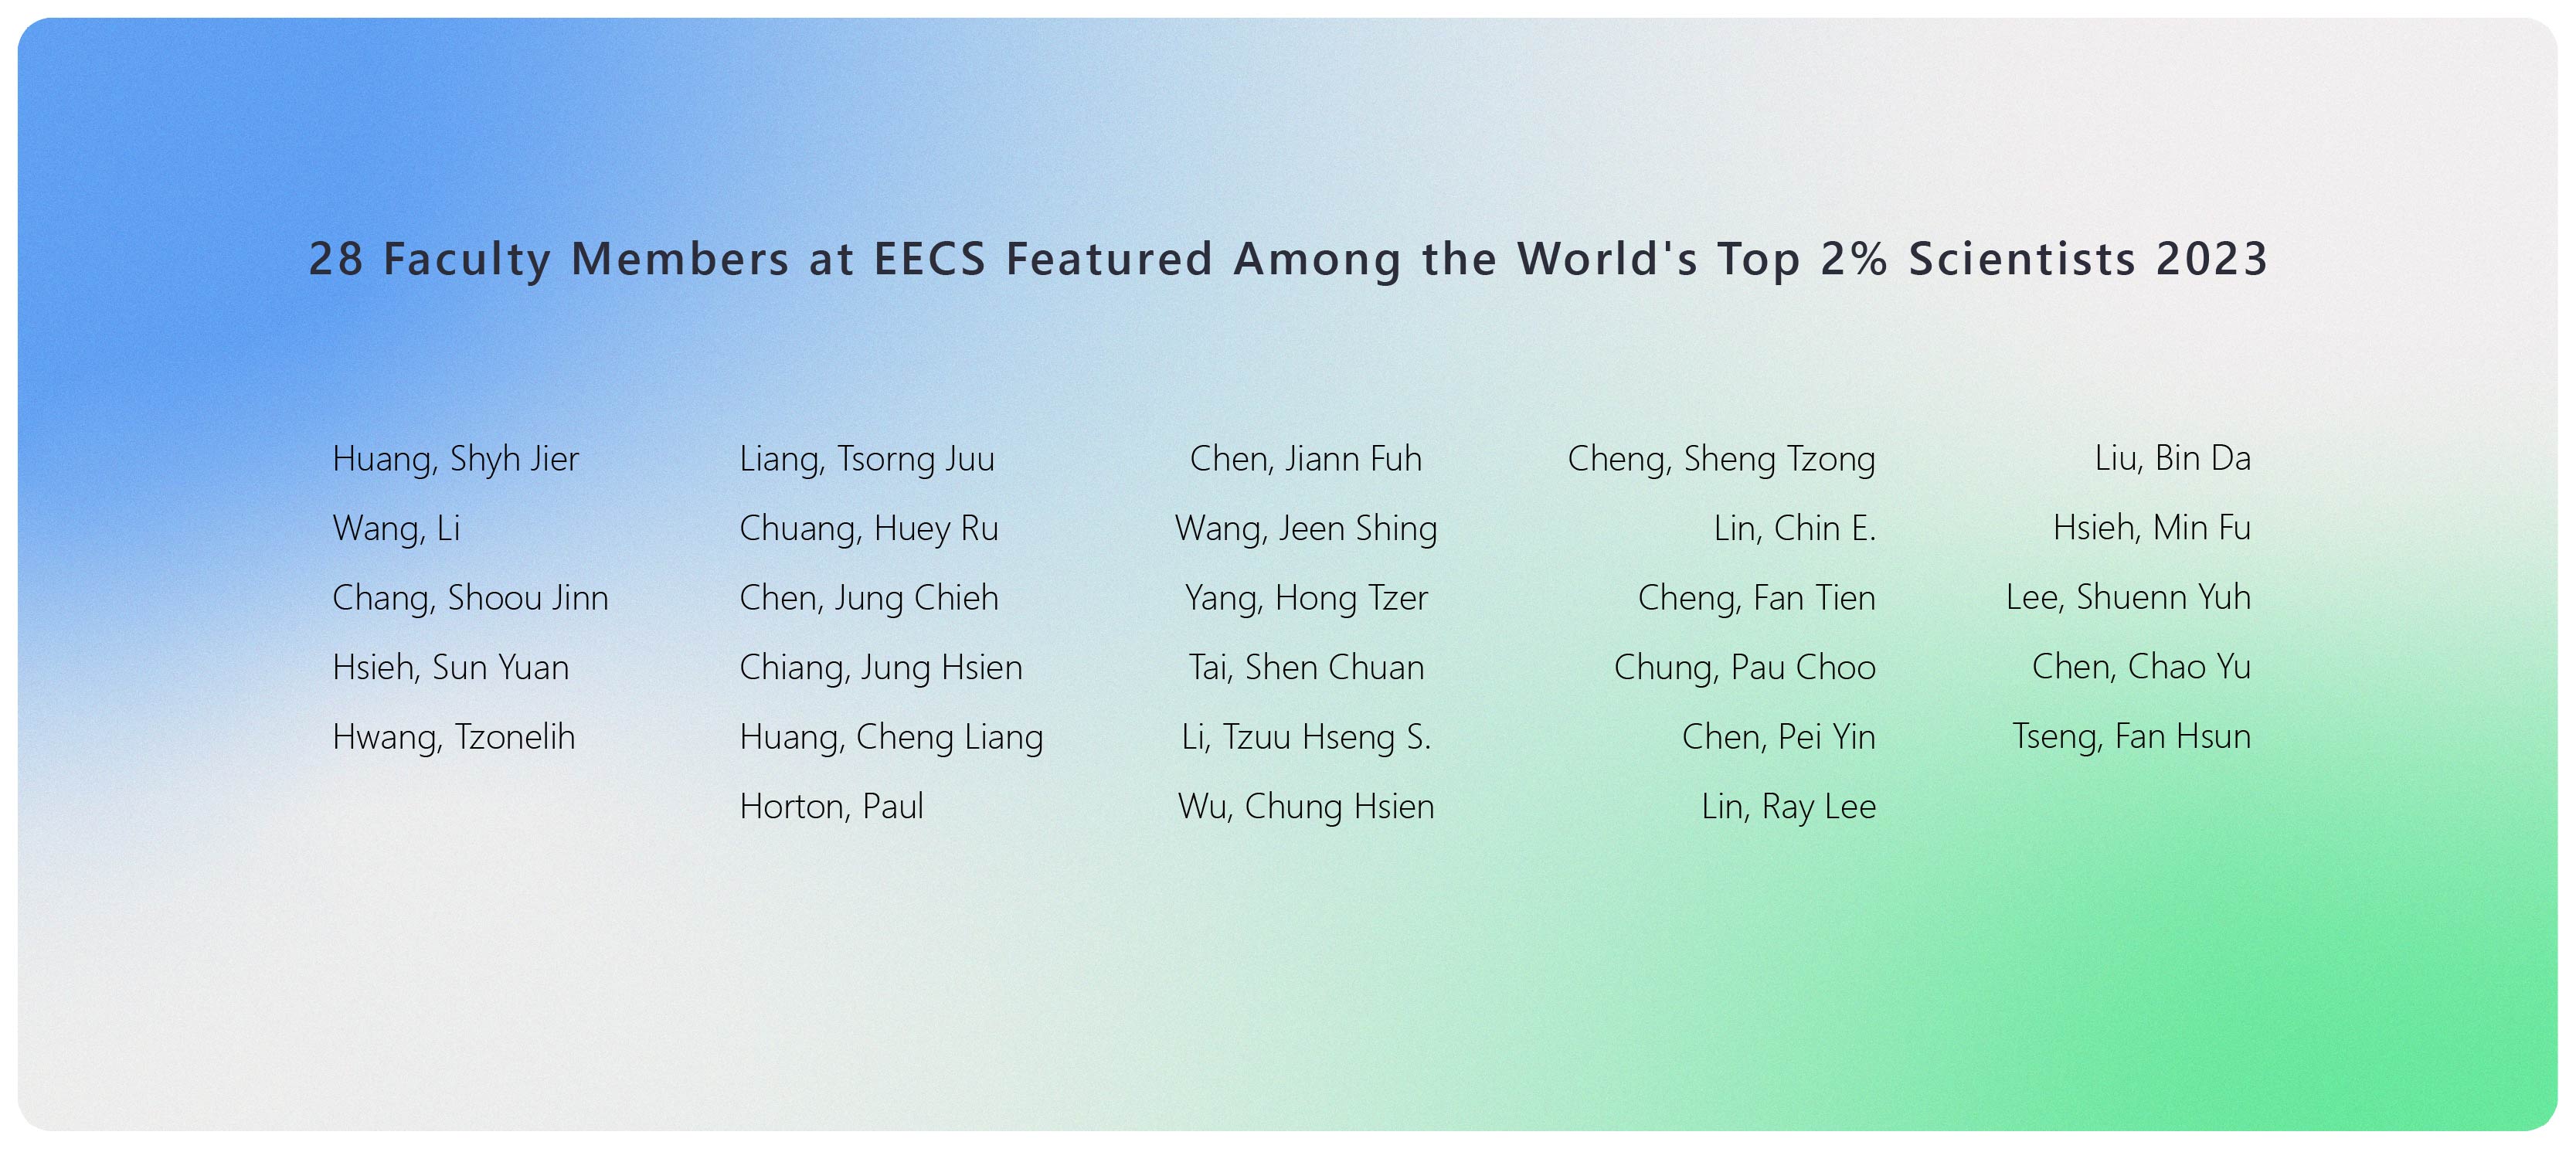 Congratulations! Twenty-nine Faculty Members at EECS Featured Among the World's Top 2% Scientists 2023!